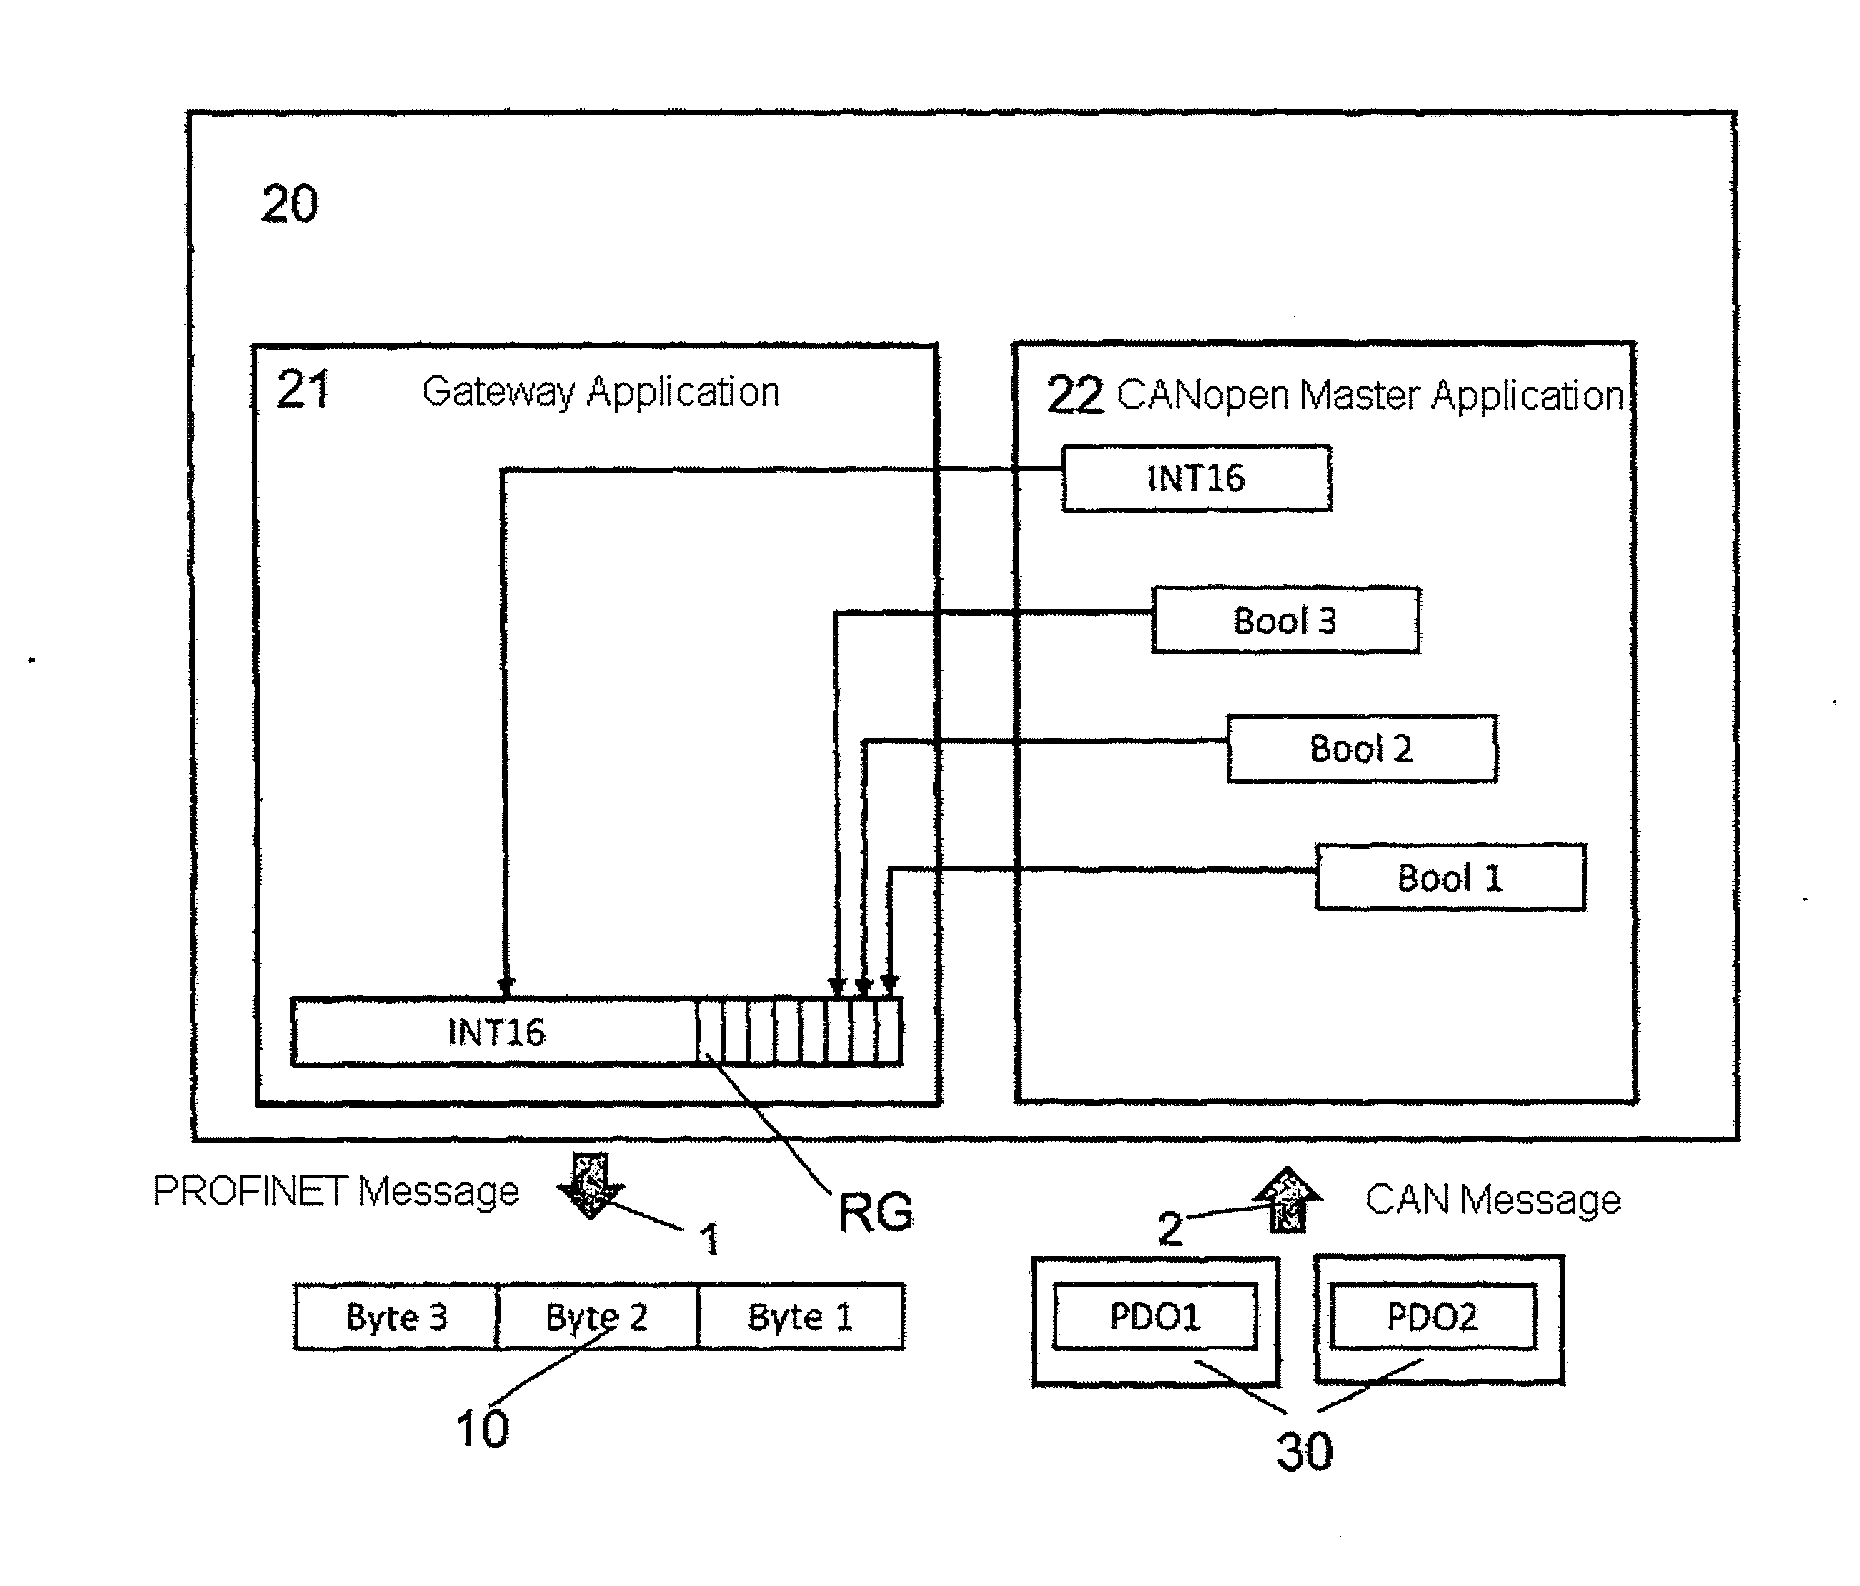 Method for transmitting a process map via a gateway device